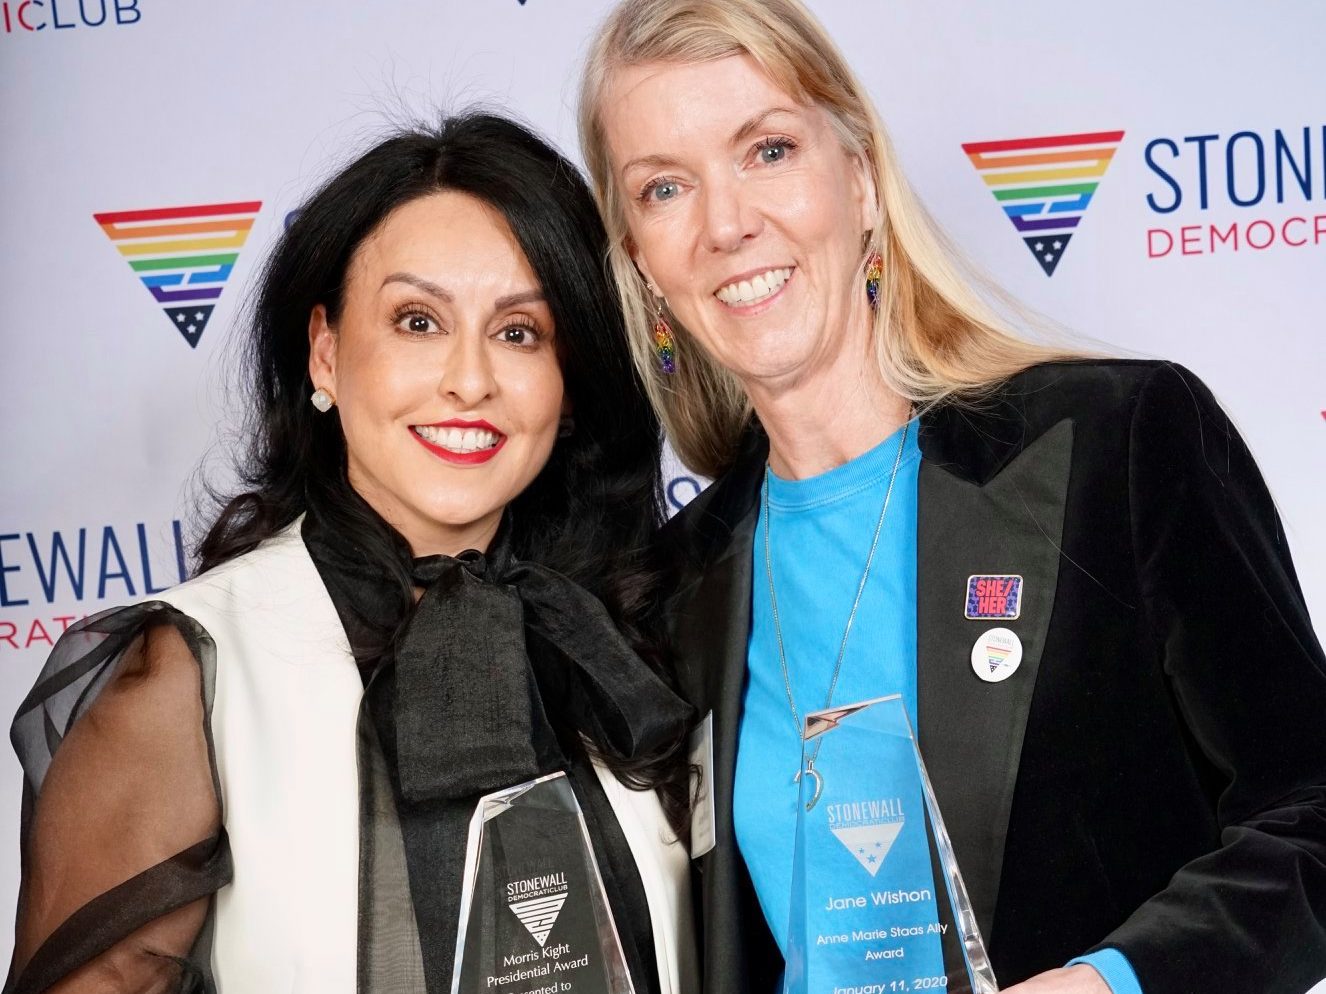 Jane Wishon and Nury Martinez pose in front of a white backdrop with awards from the Stonewall Democractic Club's "Stoney Awards"